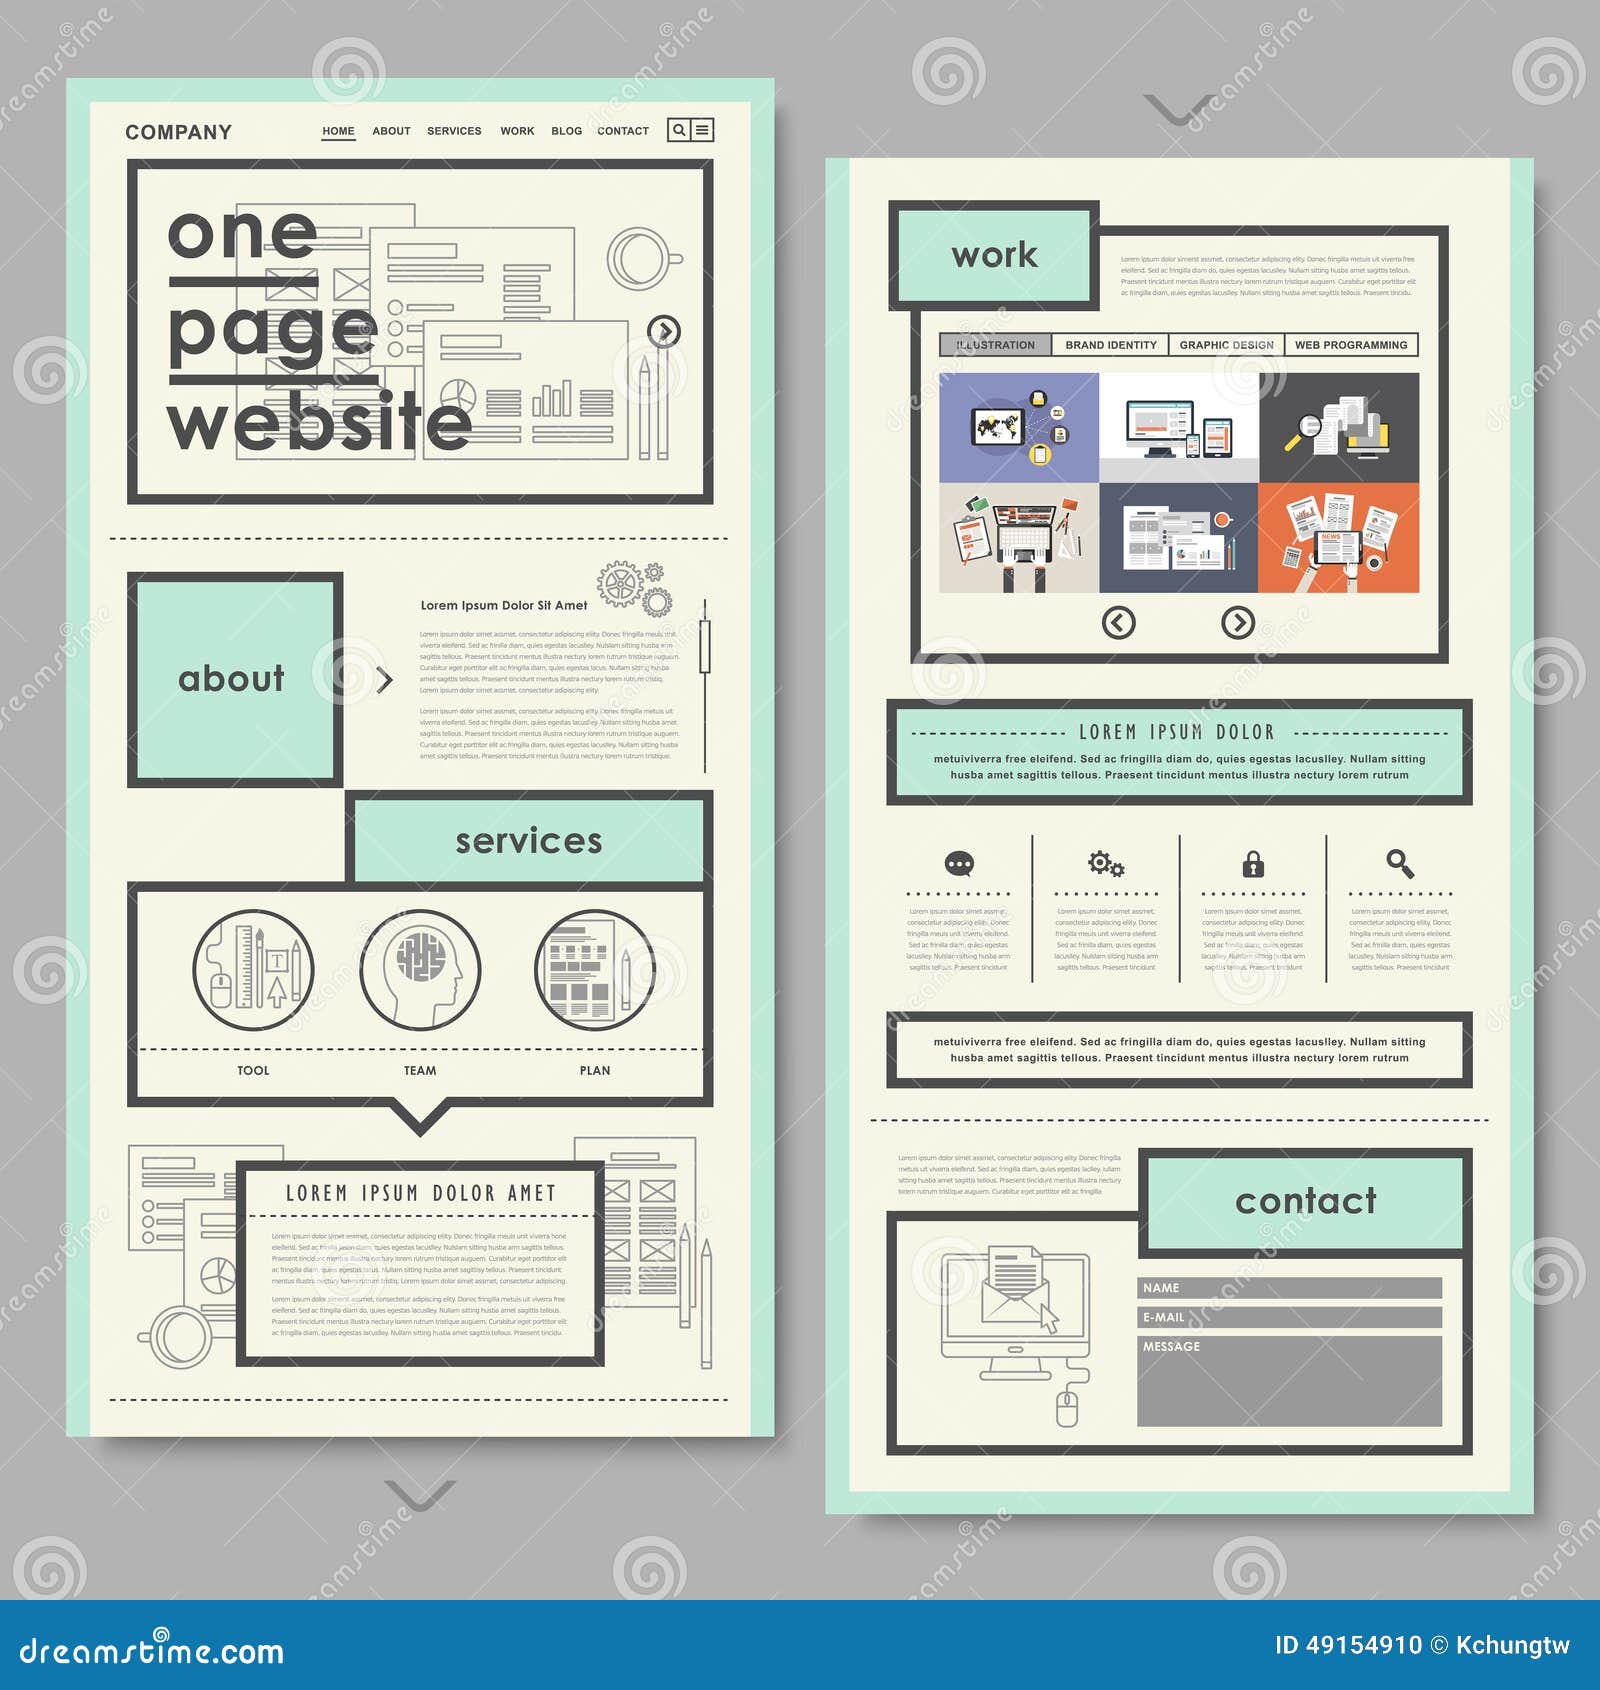 Retro Document Style One Page Website Design Stock Vector ...